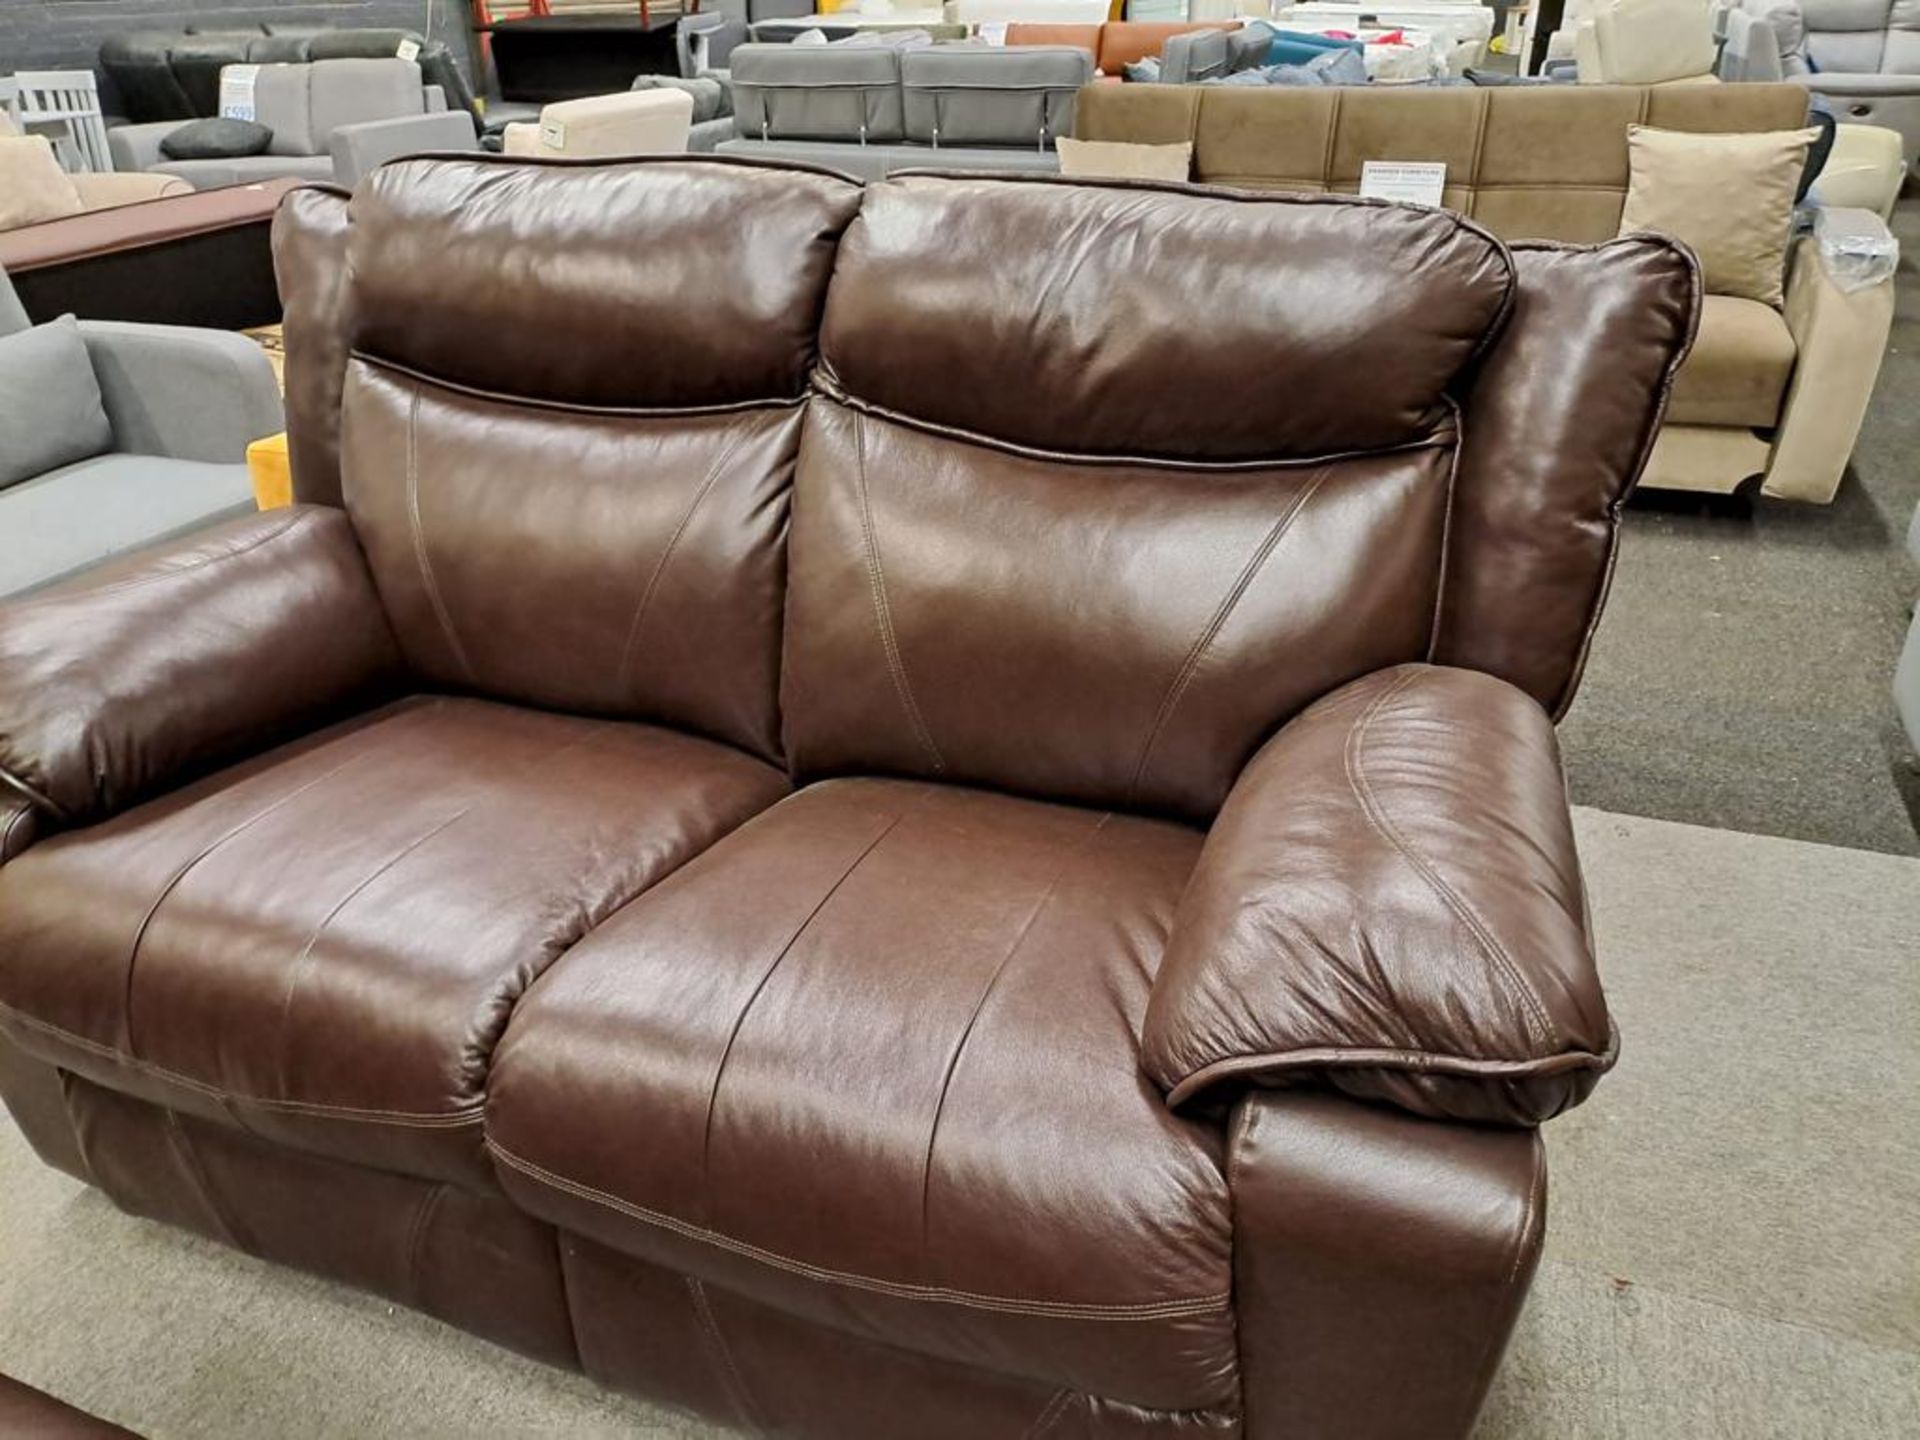 *EX DISPLAY* Santa fe 2 + 2 seater sofa in chocolate brown full leather. - Image 8 of 8